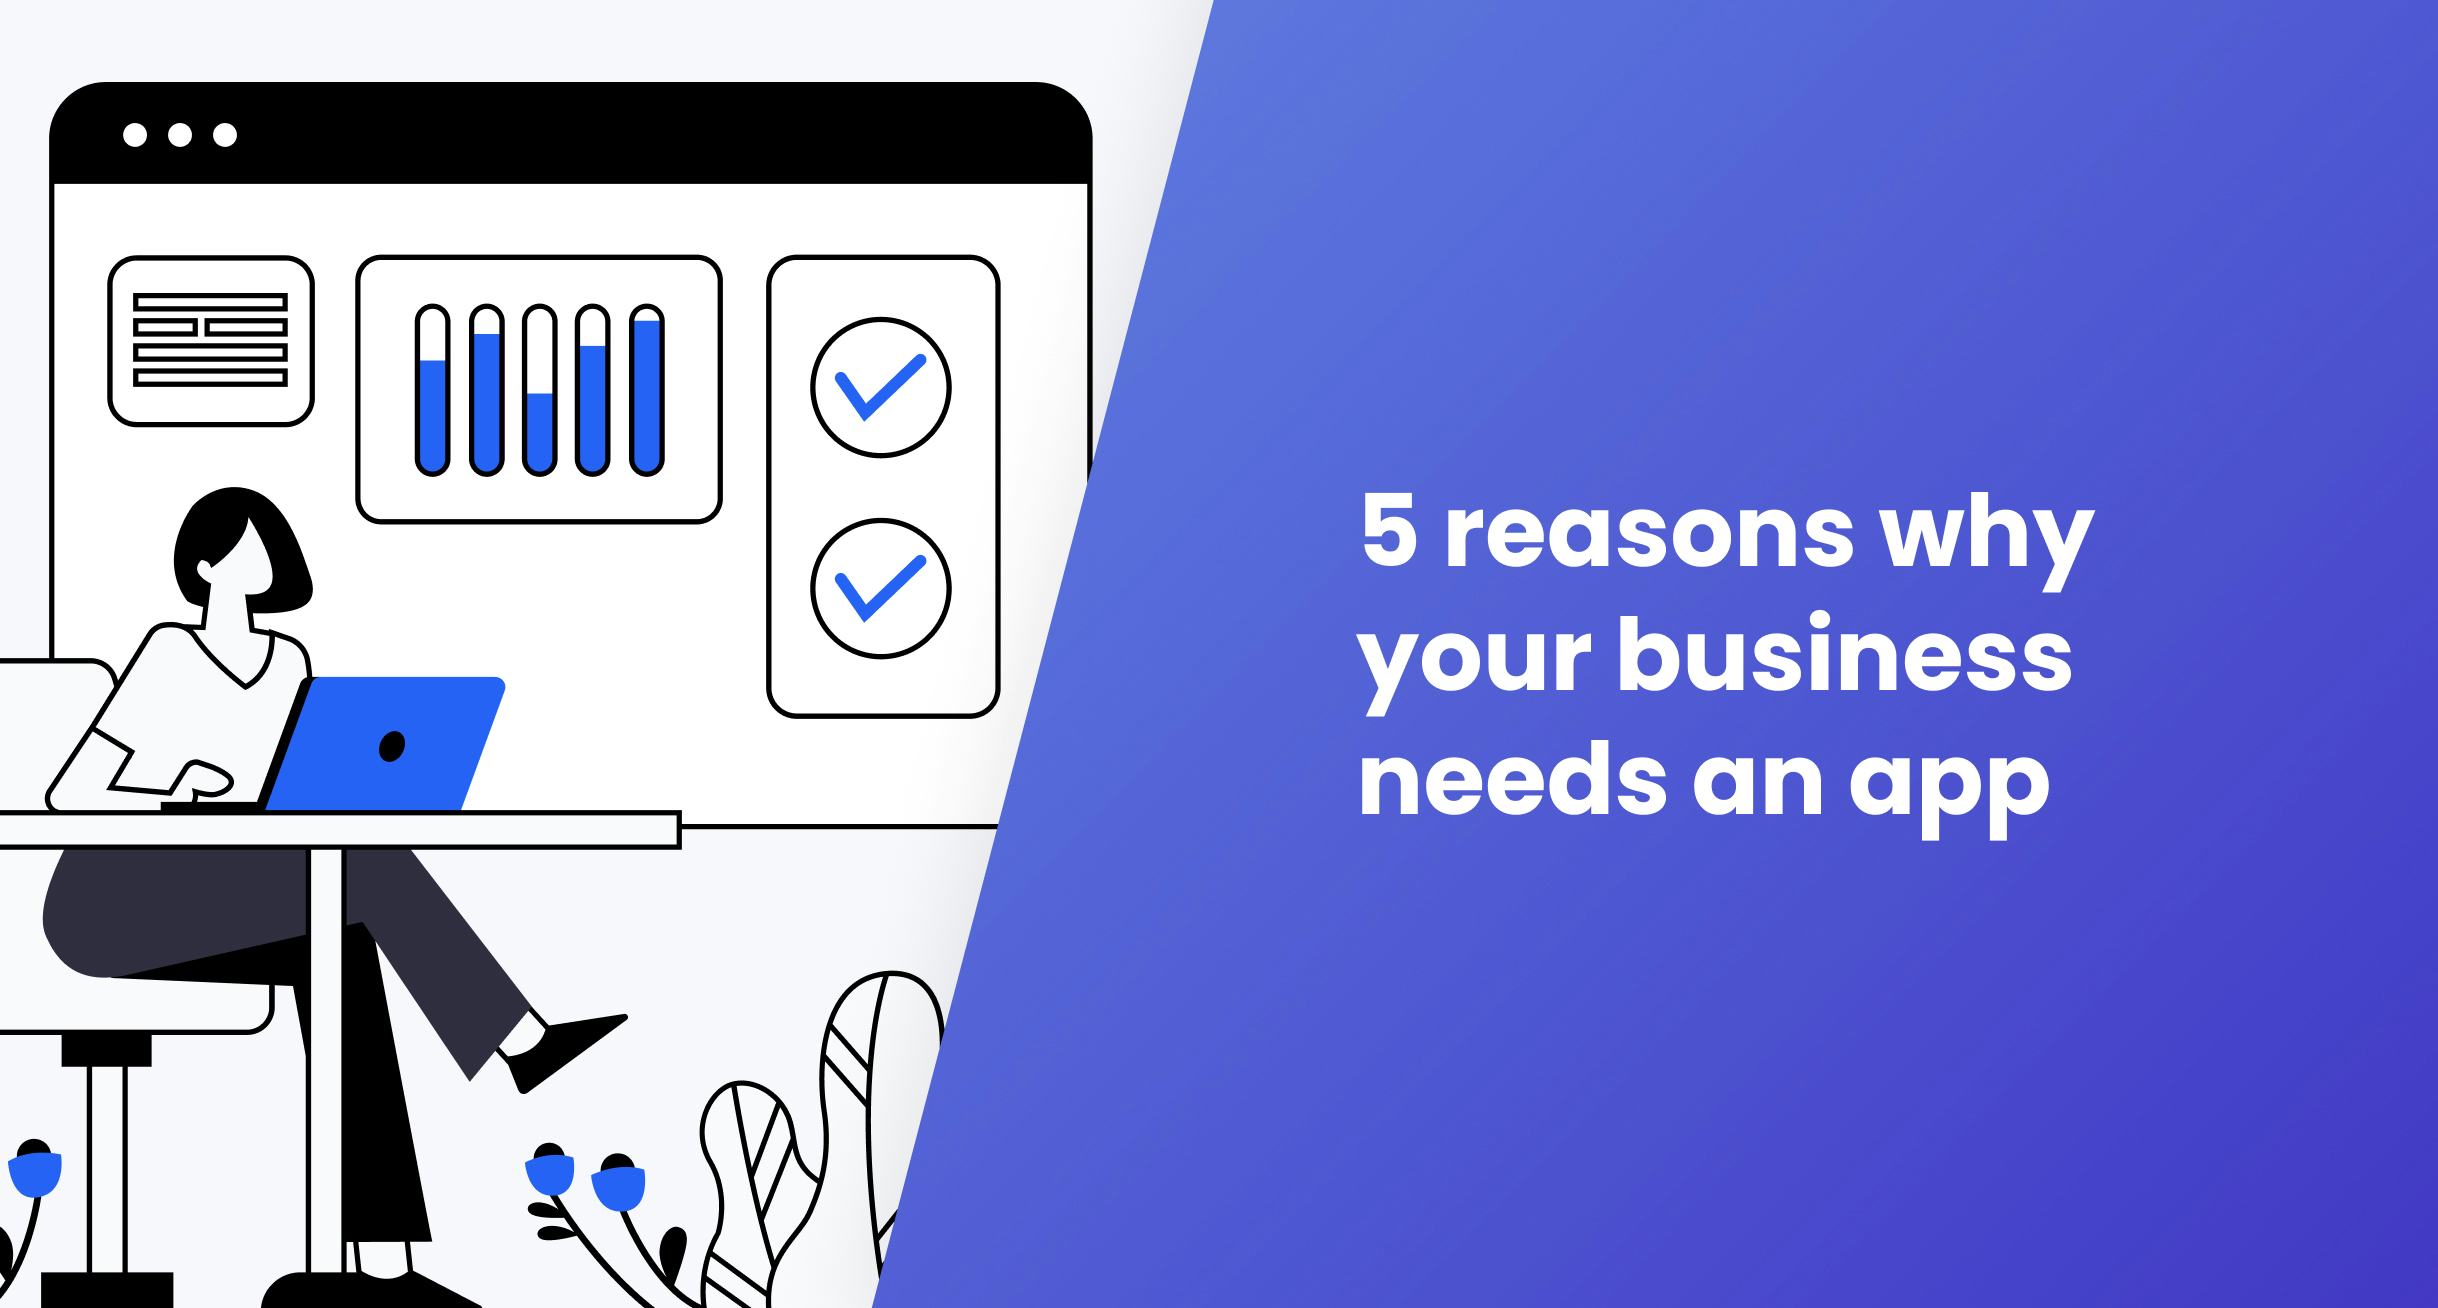 Nightborn - 5 reasons why your business needs an app